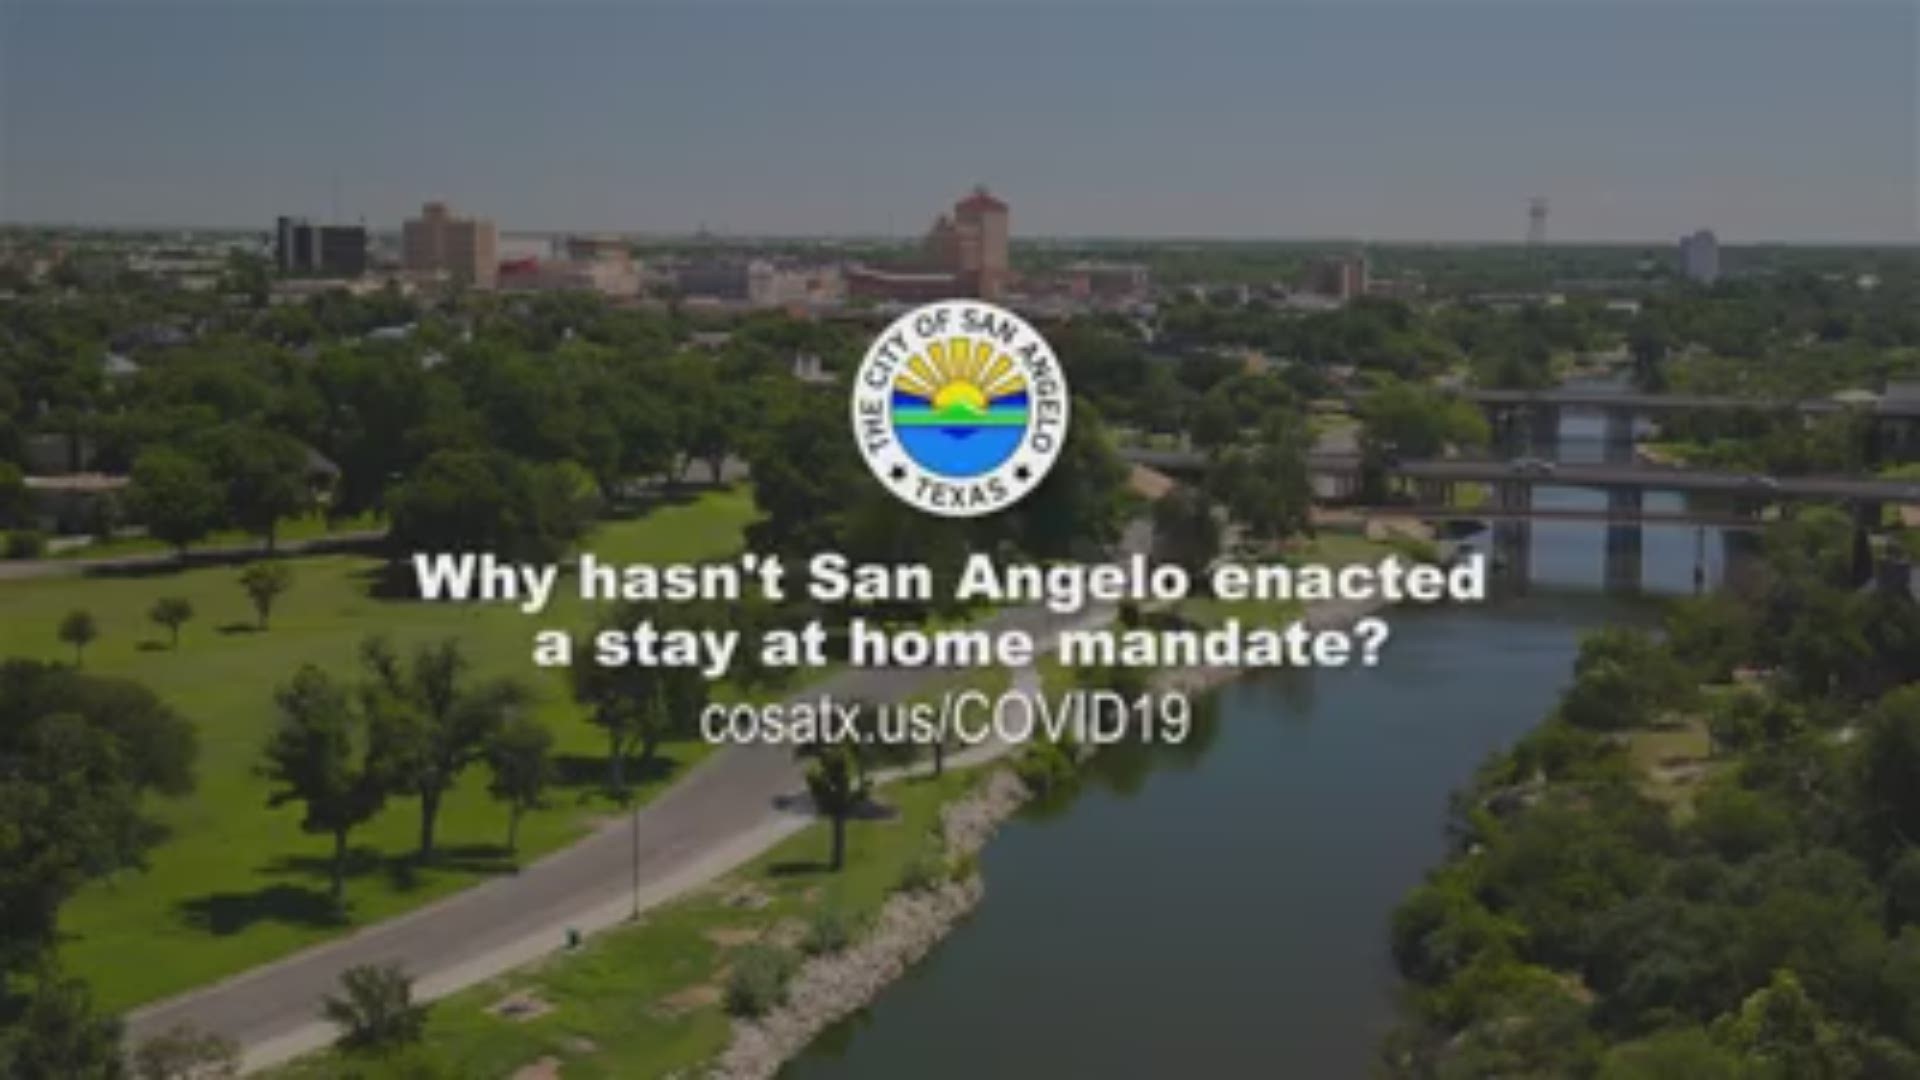 San Angelo's Mayor Brenda Gunter speaks about:
"Stay at home" vs. what is currently in place, why the City hasn't released more information about the positive cases.